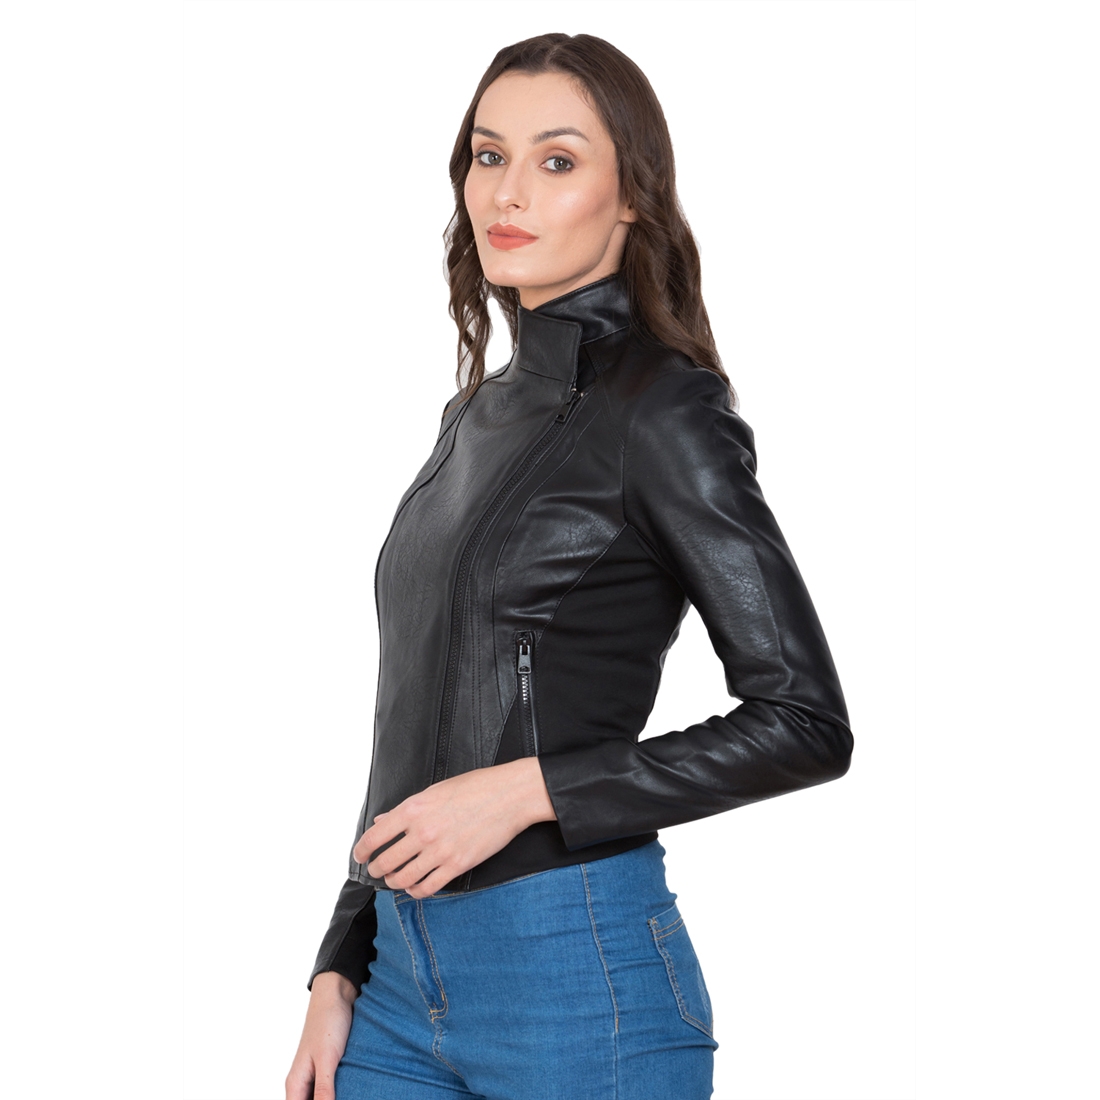 Justanned | JUSTANNED CARBON WOMEN LEATHER JACKET 2